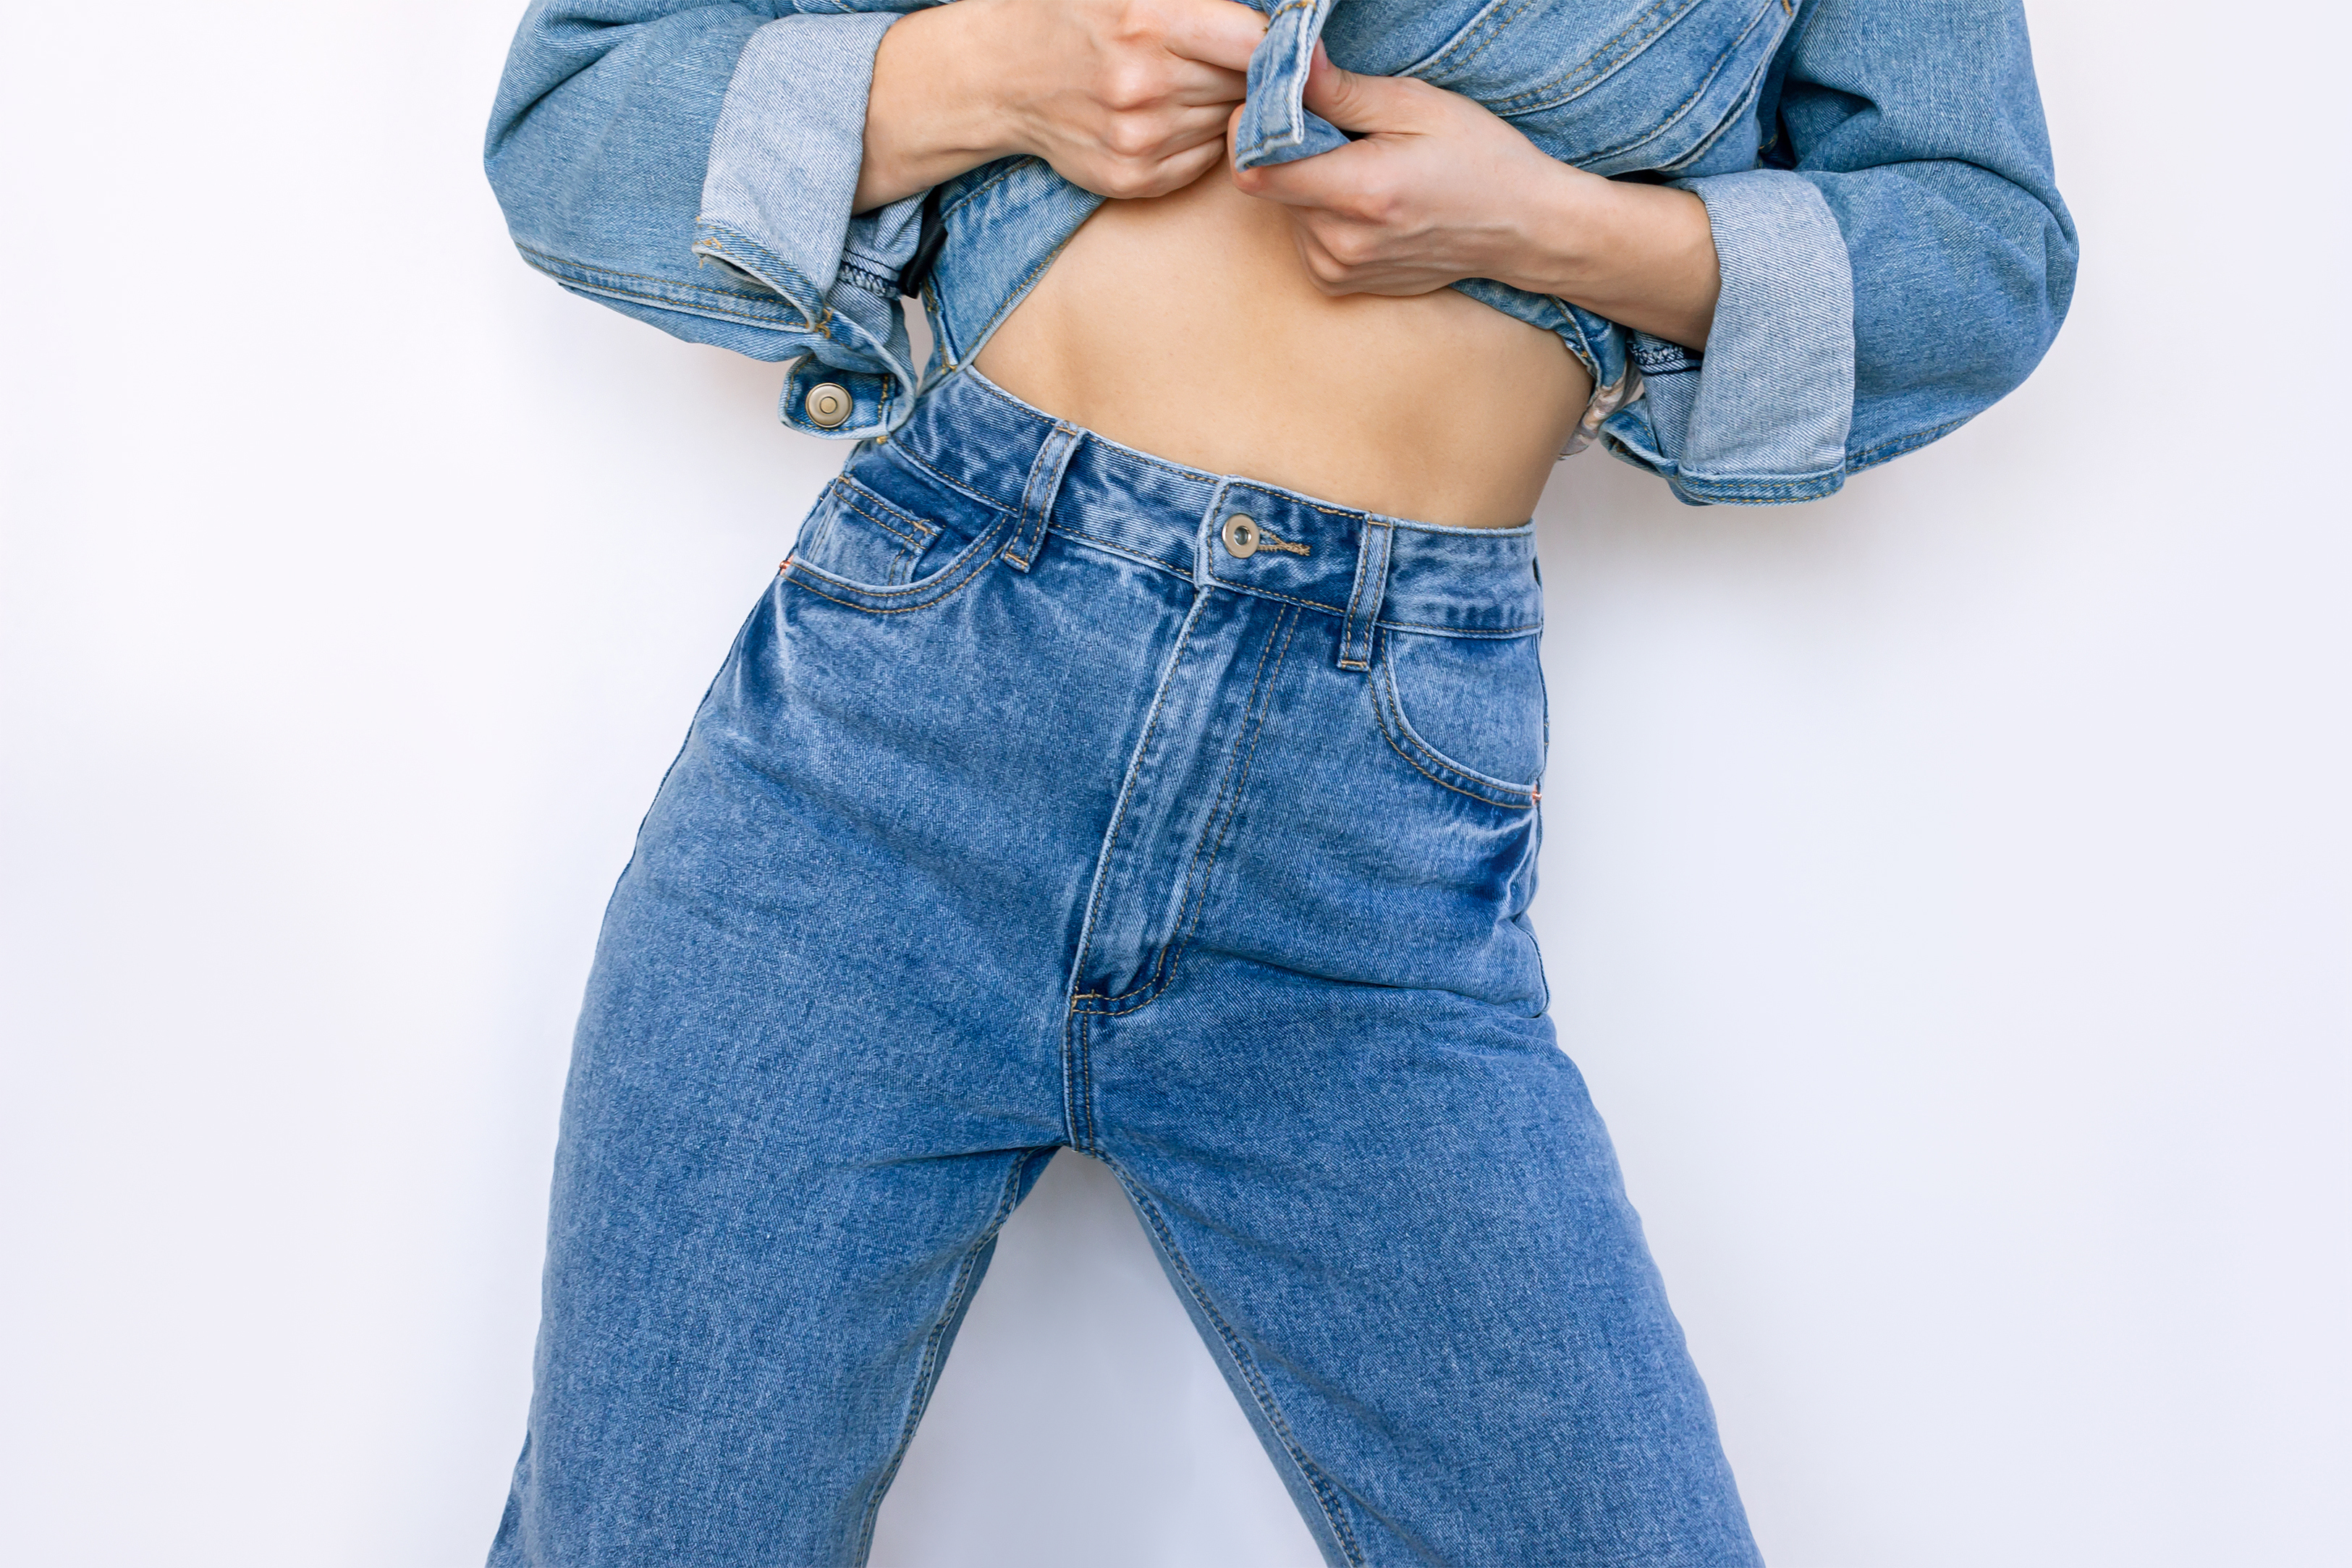 How To Choose The Right Fit Of Jeans That Flatters Your Body Type